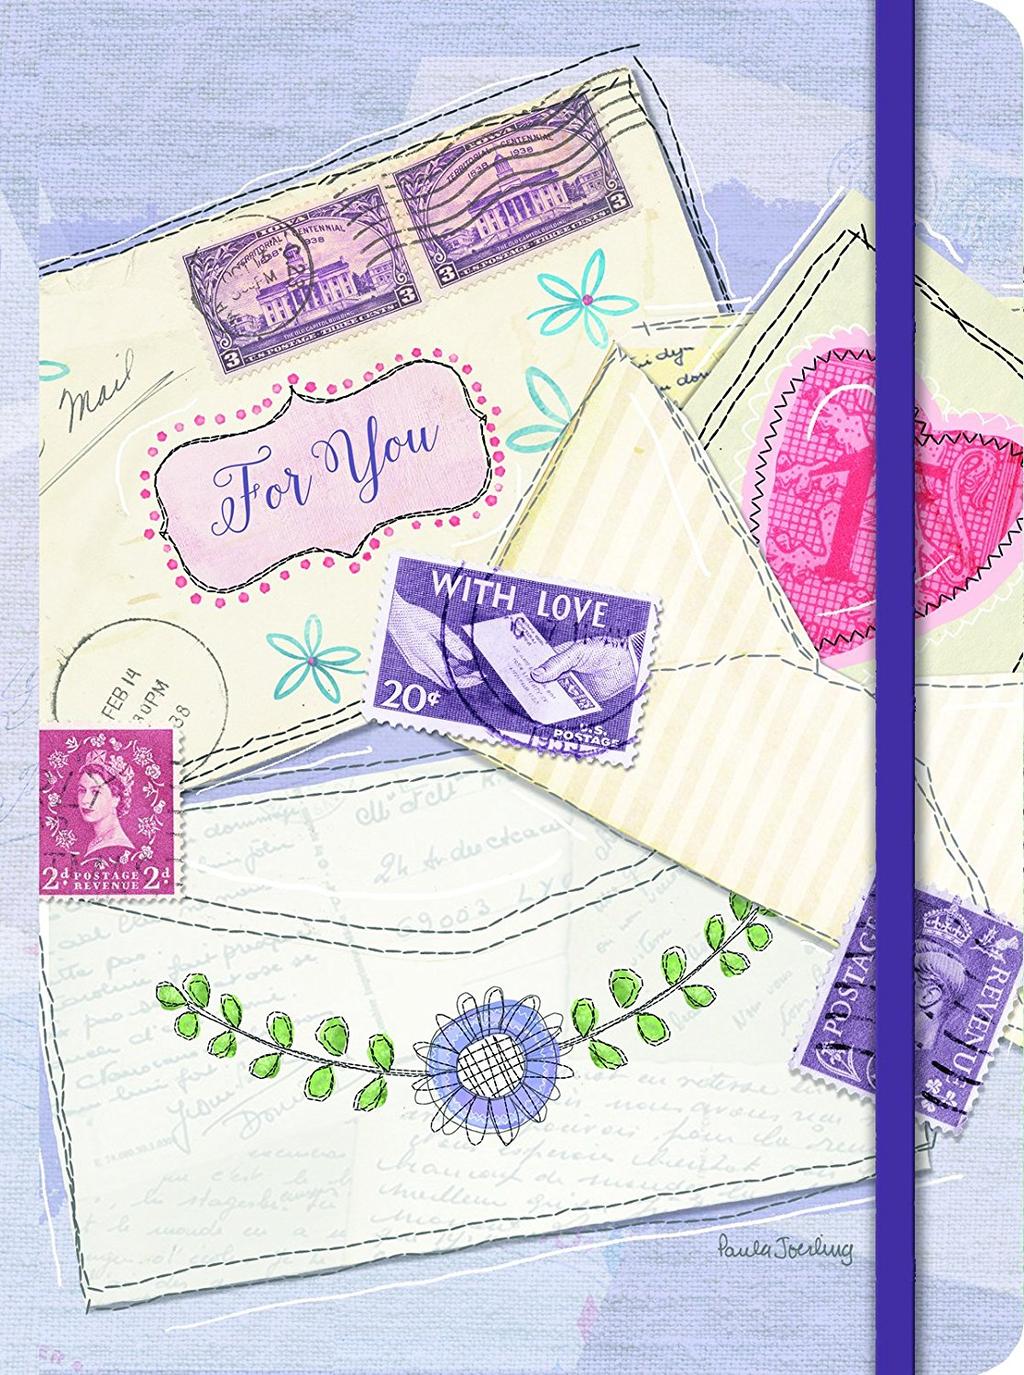 Stitch In Time Memory Journal by Paula Joerling Main Image